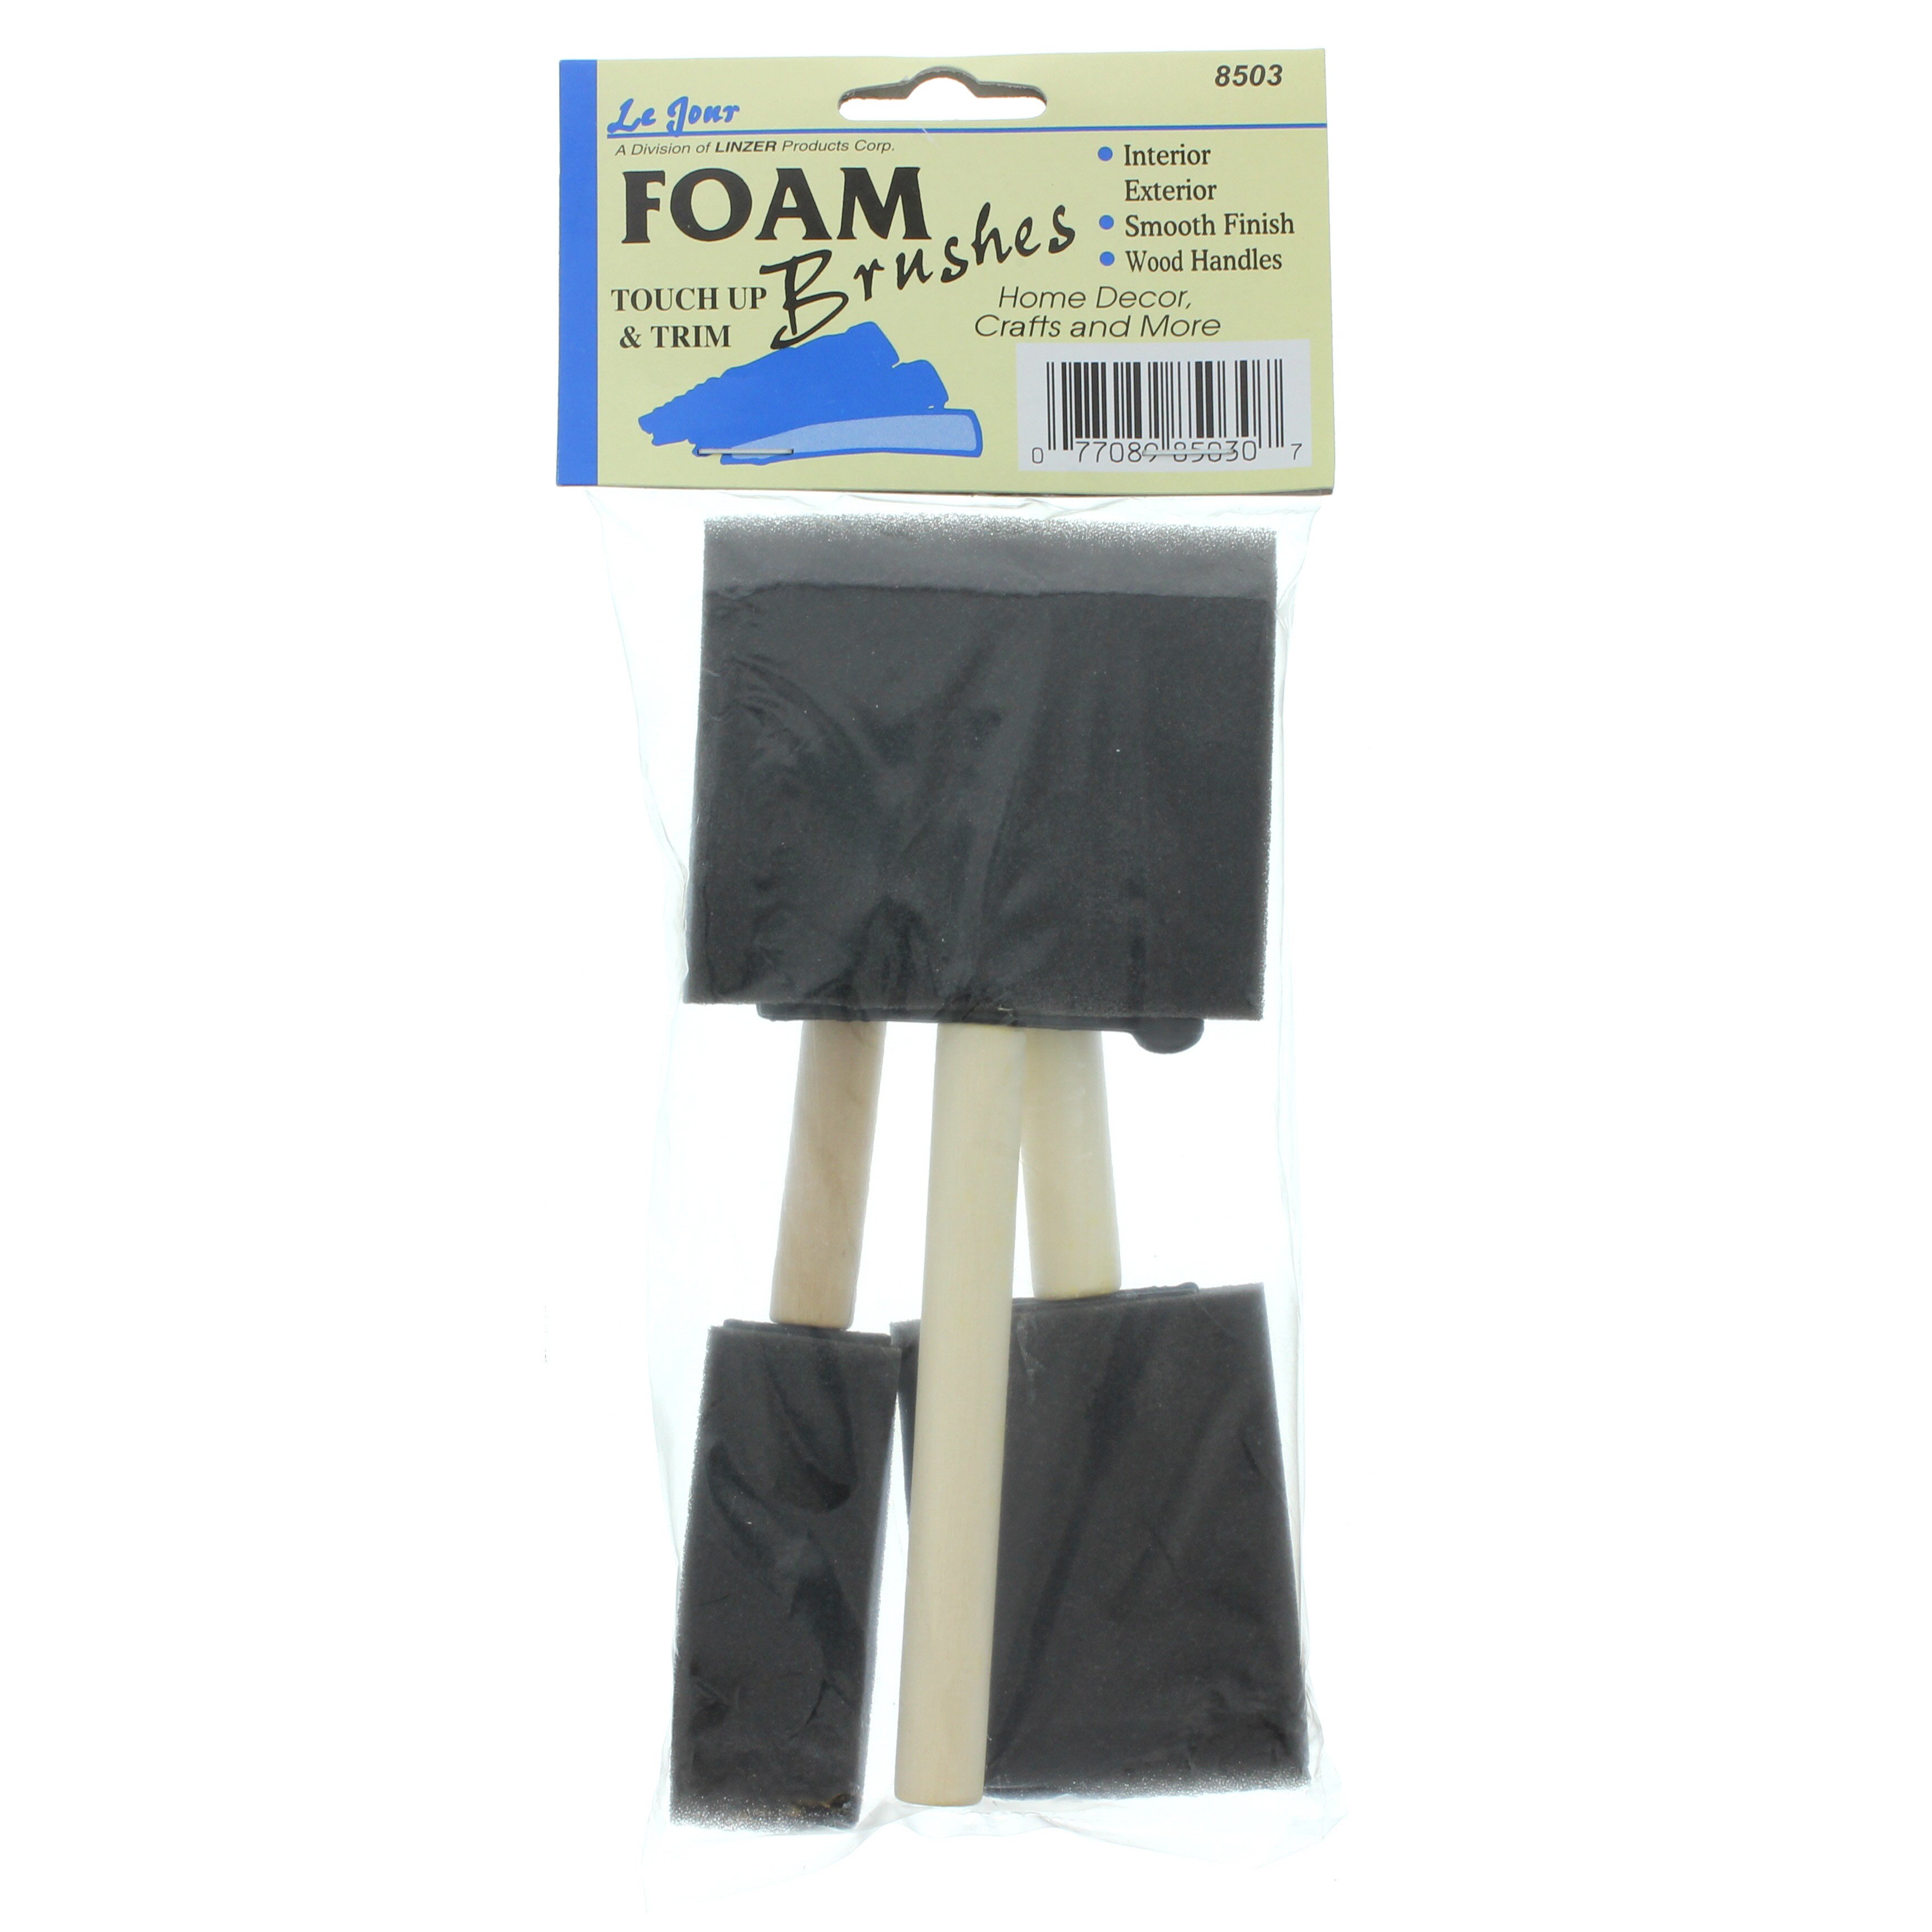 Linzer Touch Up & Trim Assorted Foam Brushes - Shop Painting at